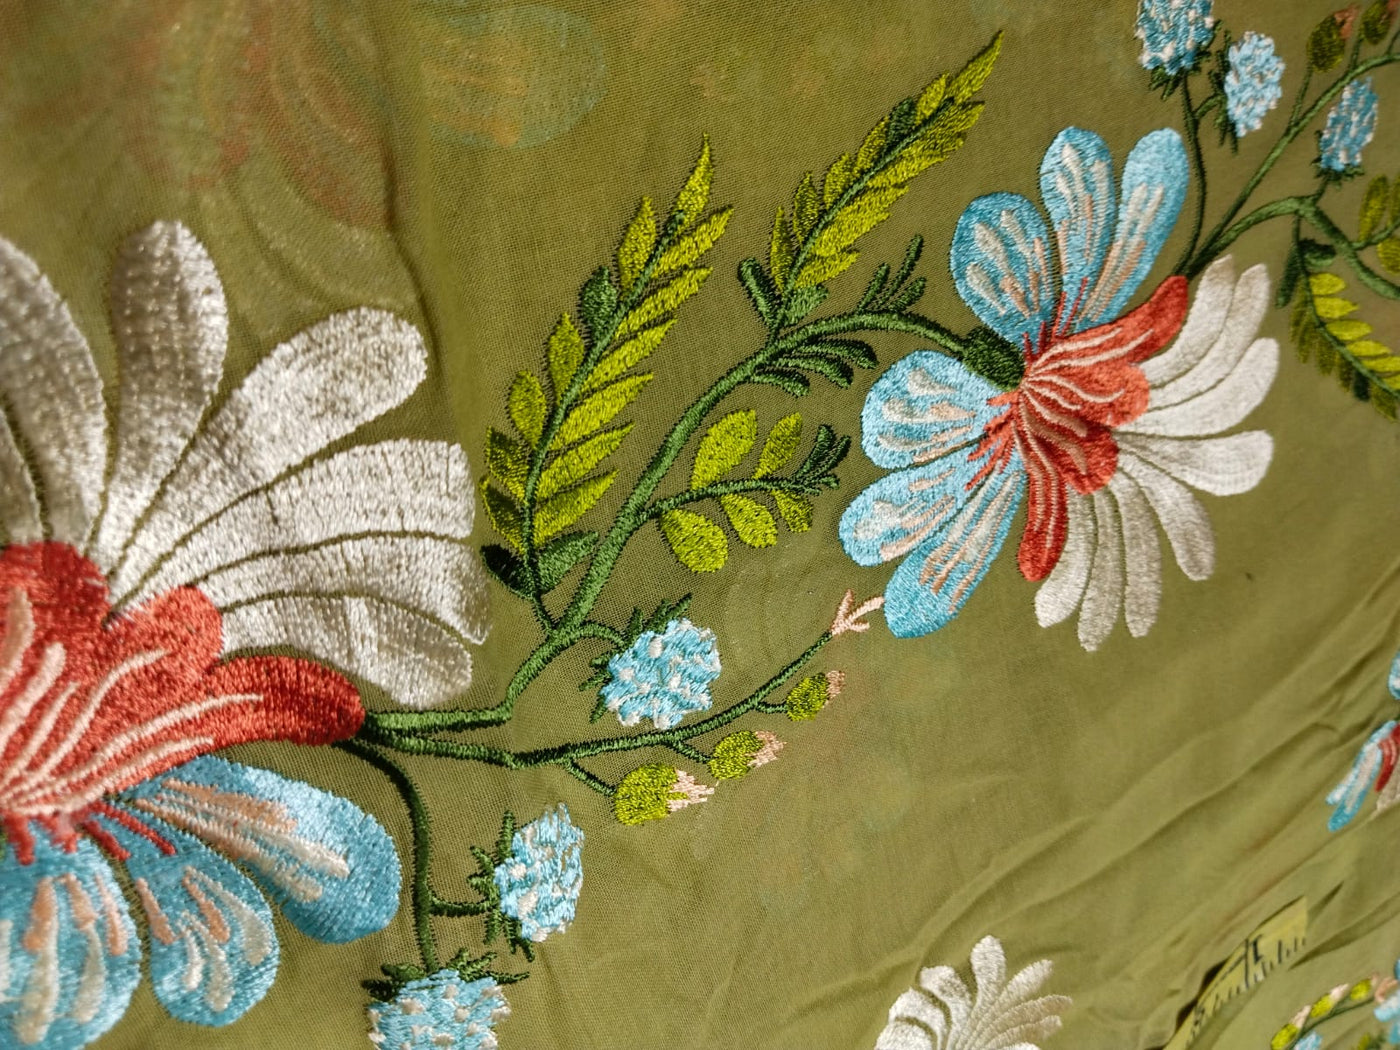 100% Cotton voile fabric~ with embroidery available in 2 colors blue and olive